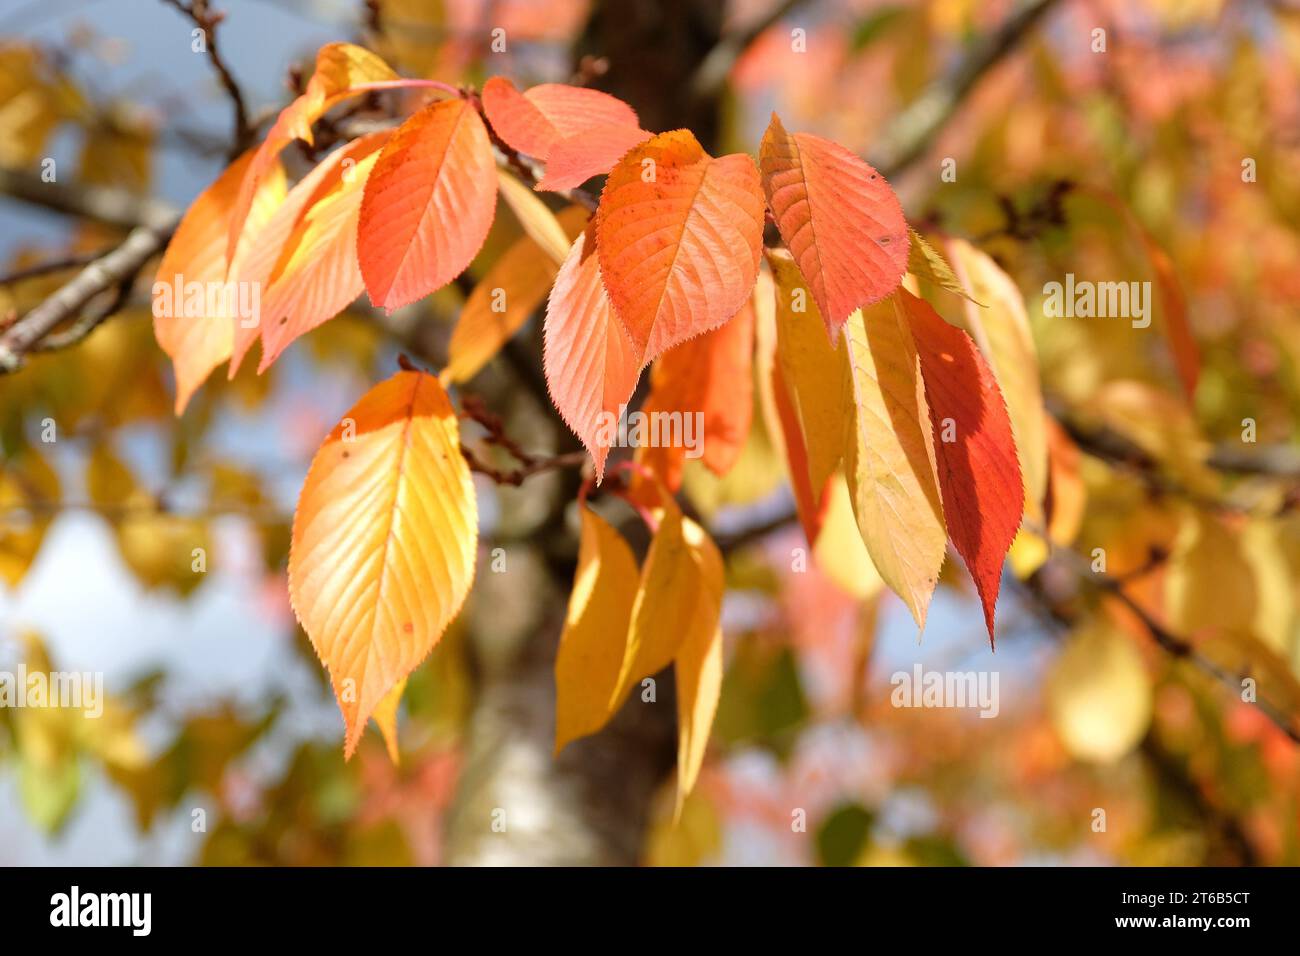 The orange and yellow autumn leaves of the Prunus yedoensis, also known as a Yoshino cherry tree. Stock Photo